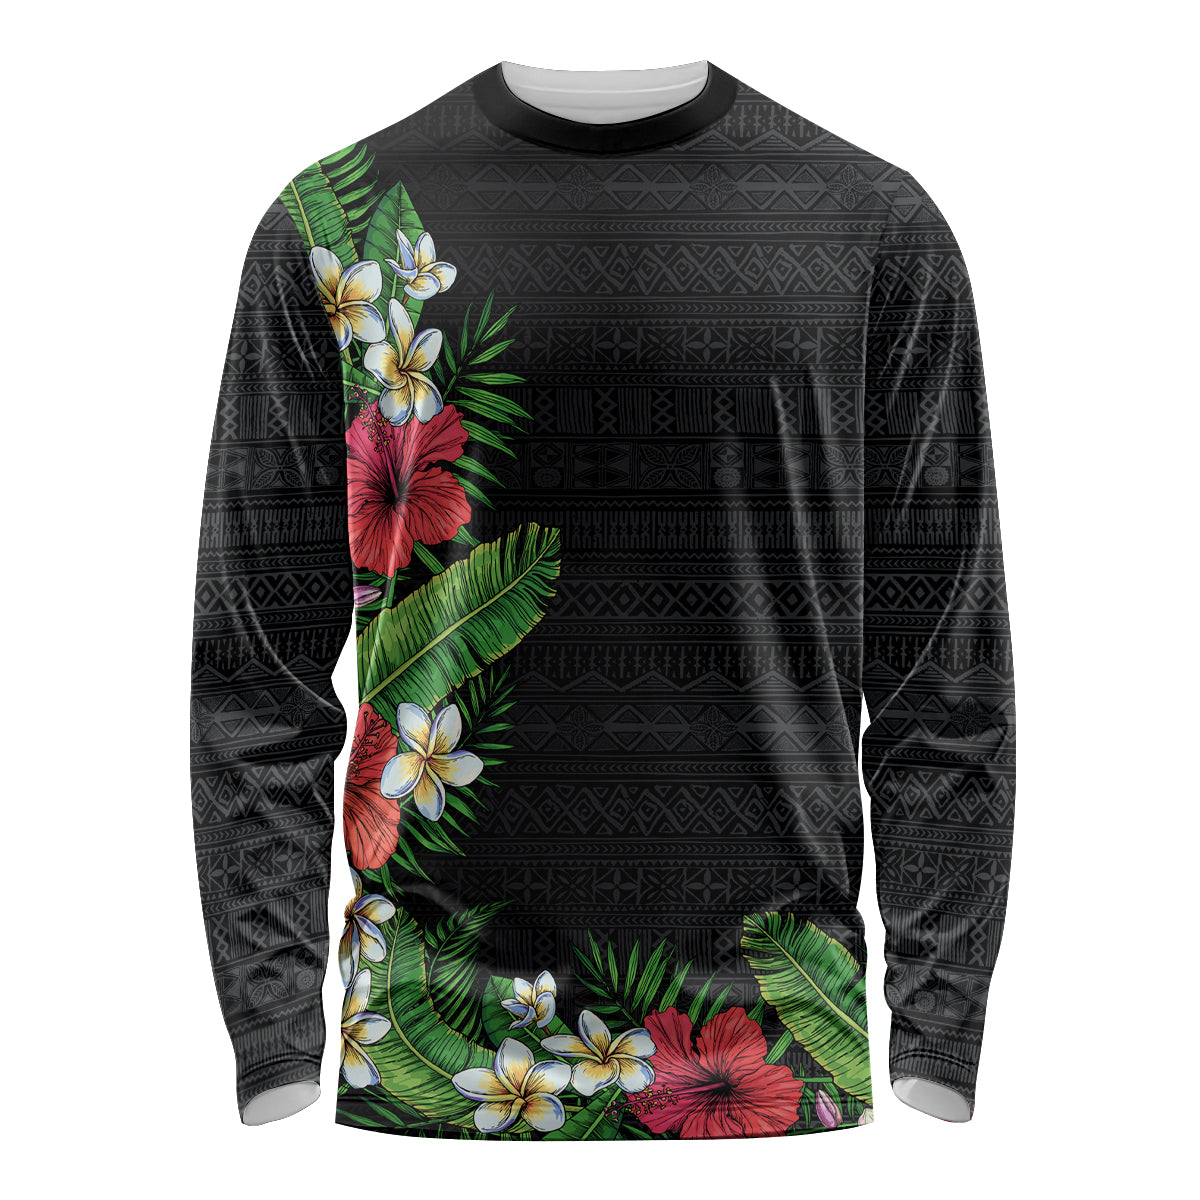 Hawaii Tropical Flowers and Leaves Long Sleeve Shirt Tapa Pattern Colorful Mode